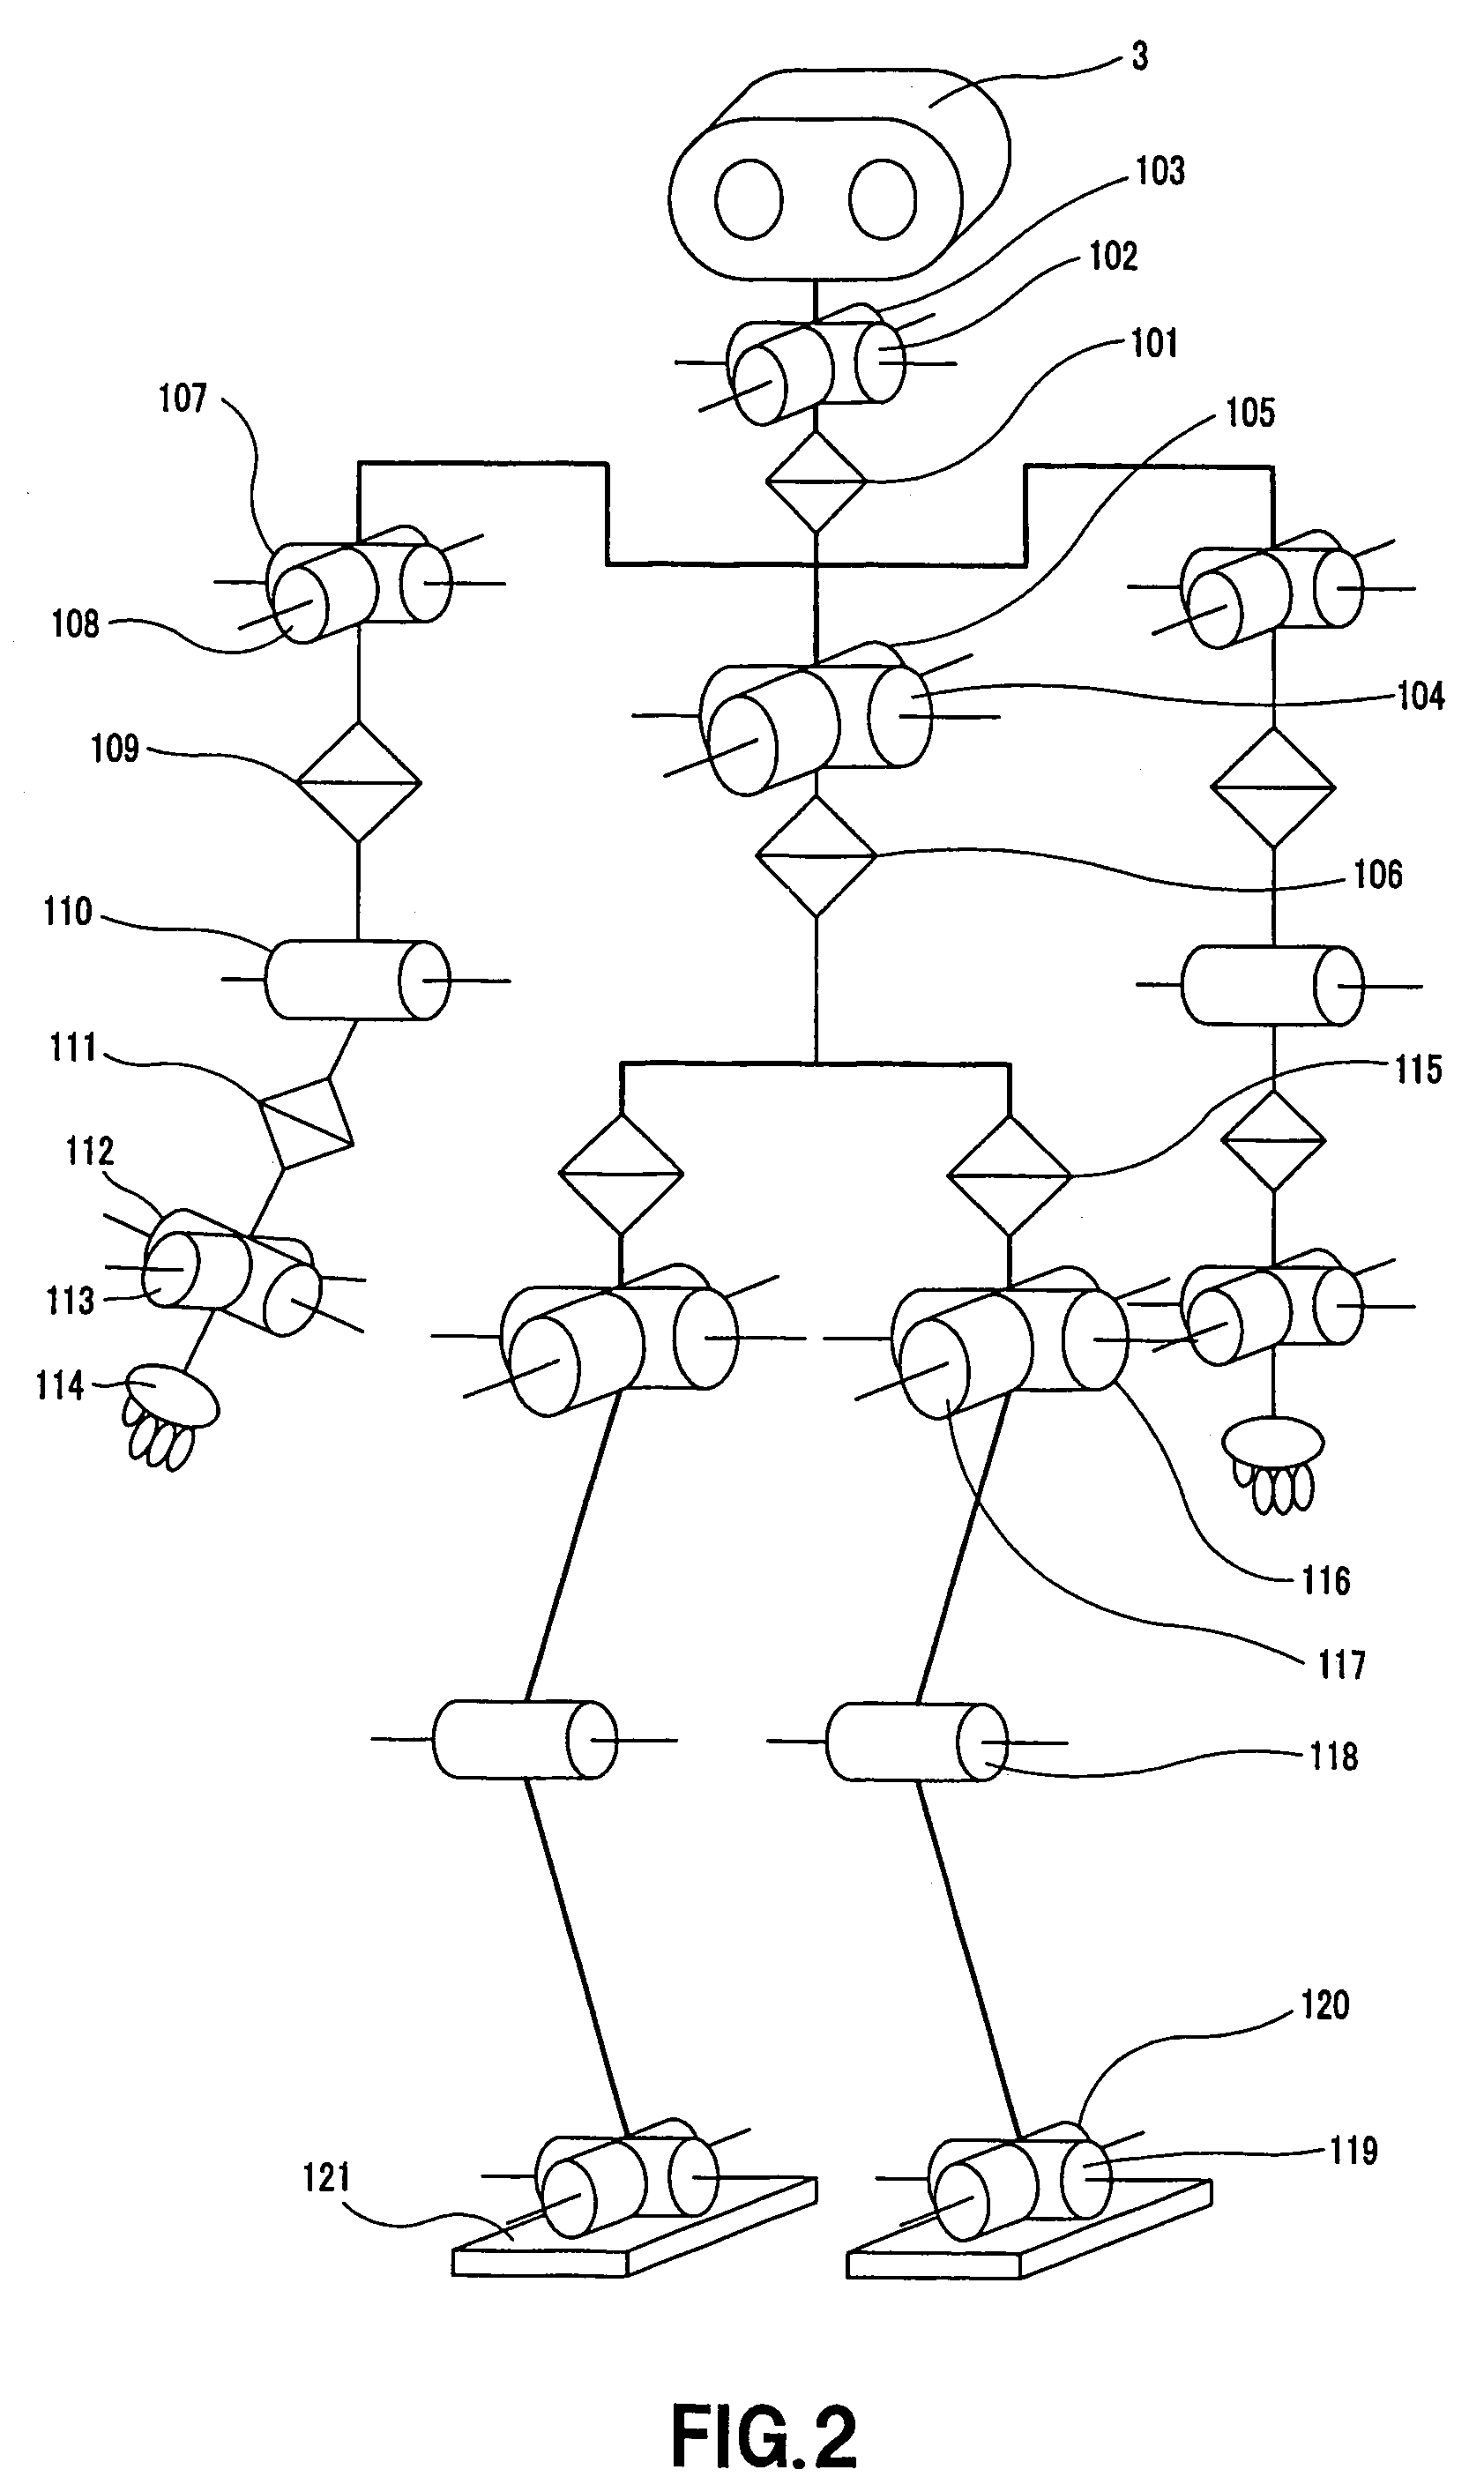 Robot apparatus and method of controlling the motion thereof